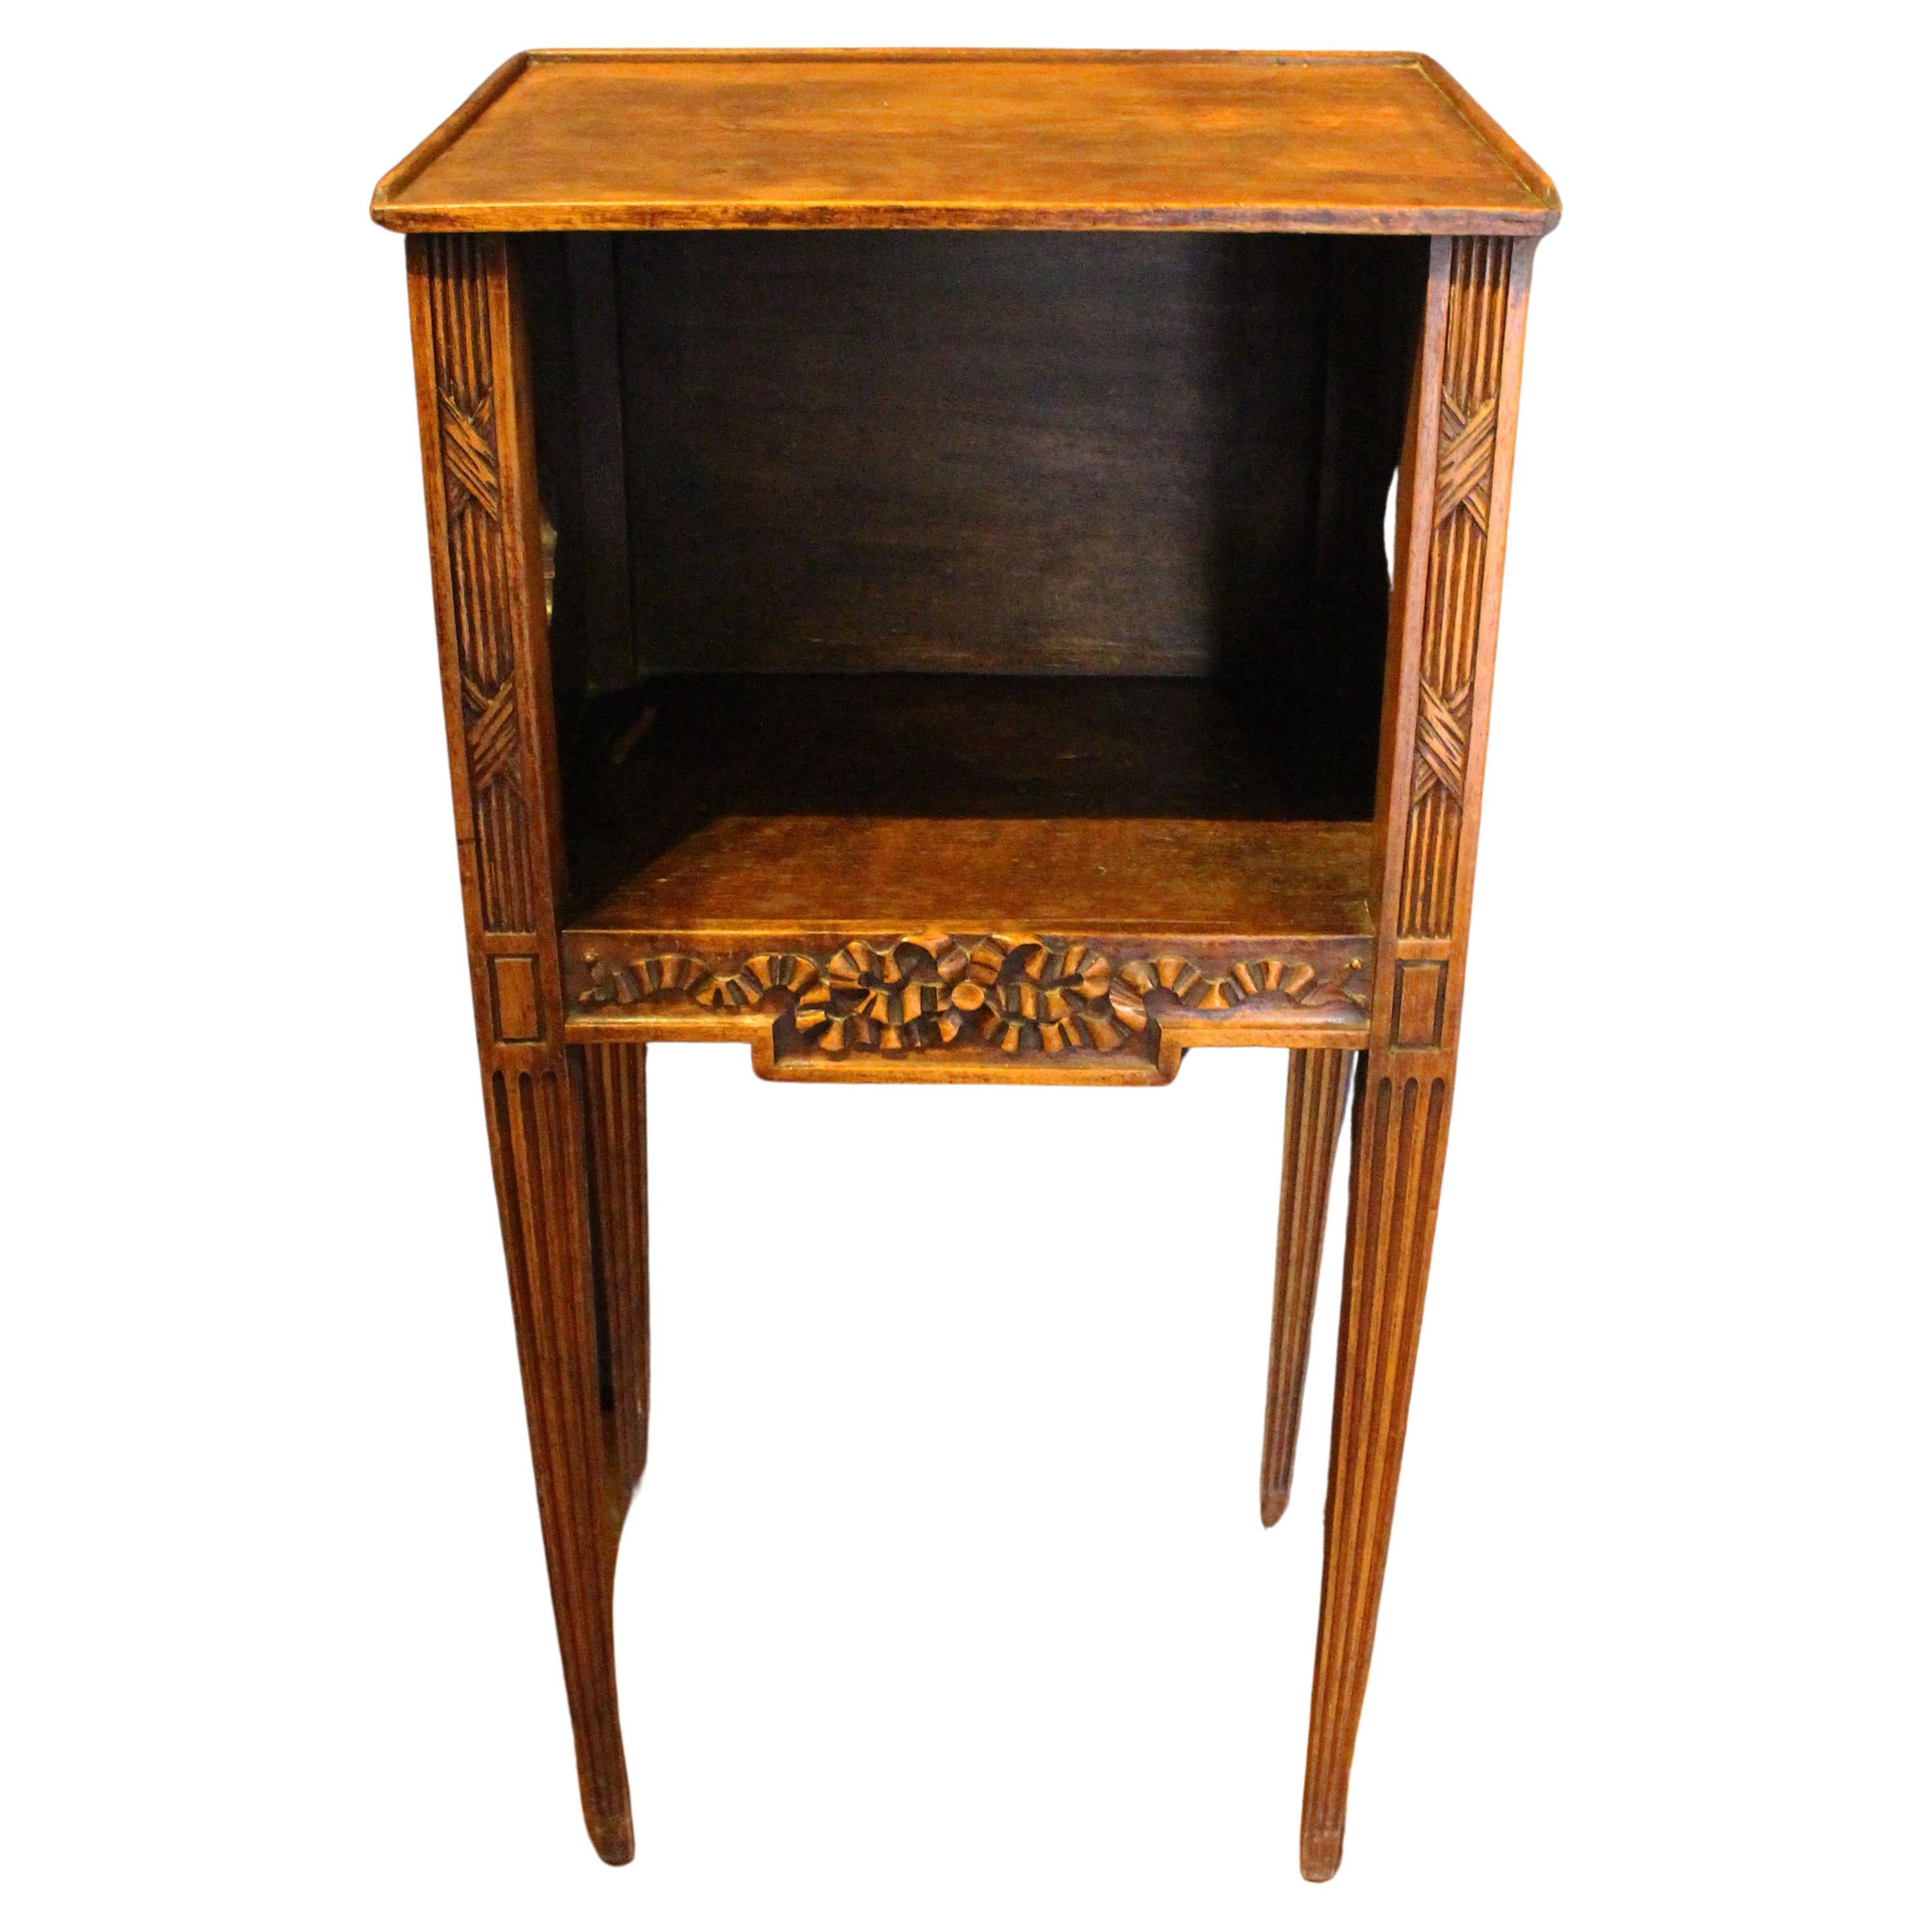 Circa 1880 Country French Chevet or Bedside Table